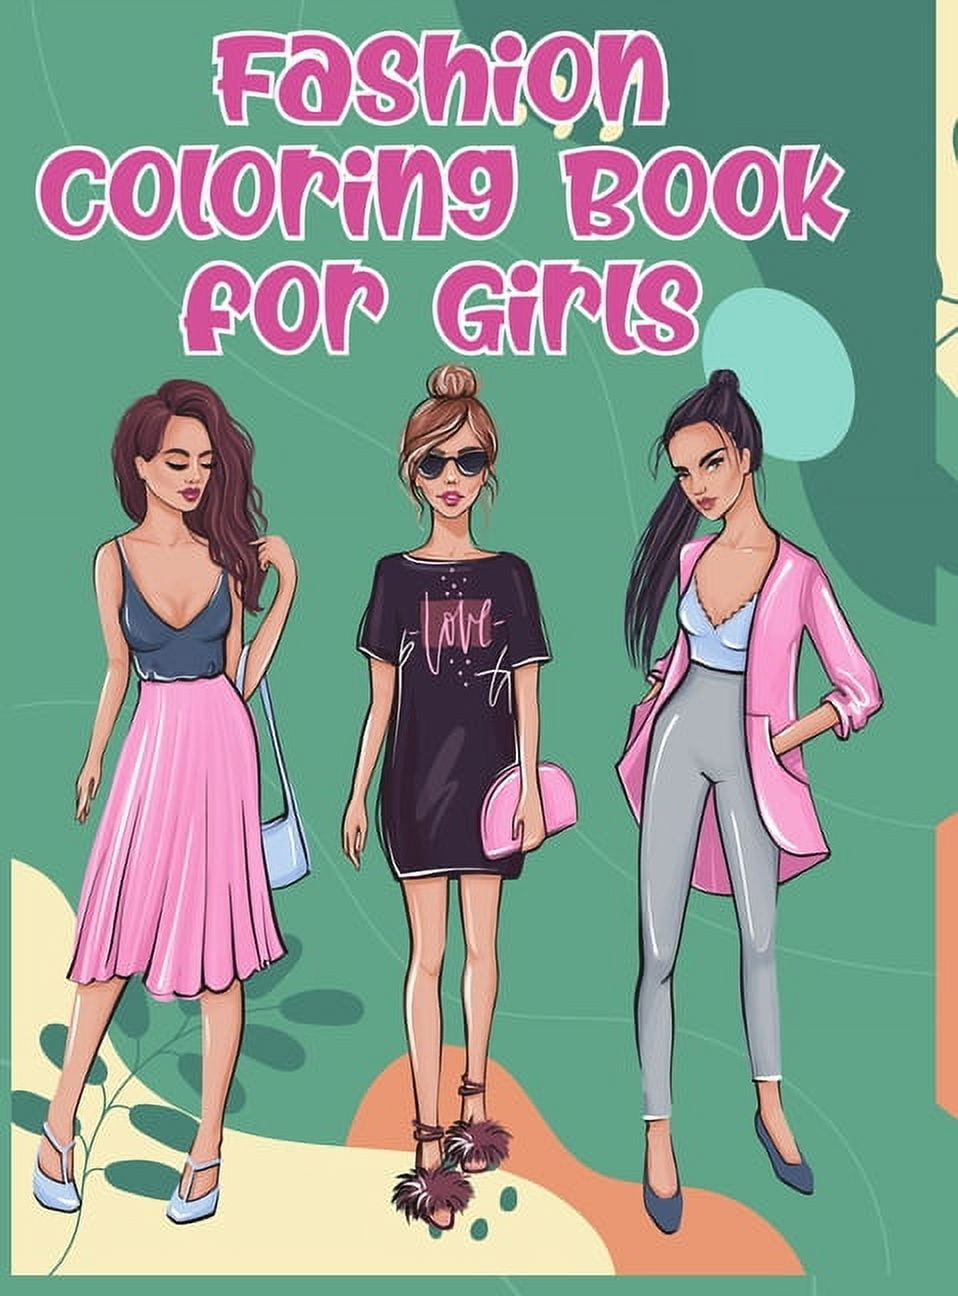 Fashion Coloring Book For Girls Ages 8-12: Color Me & Beauty;Coloring Book for Tweens With Gorgeous Beauty Fashion Style;cute Design;Coloring Pages For Girls(Kids Coloring Book) 100 Page 8.5 X 0.1 X 11 Inches [Book]